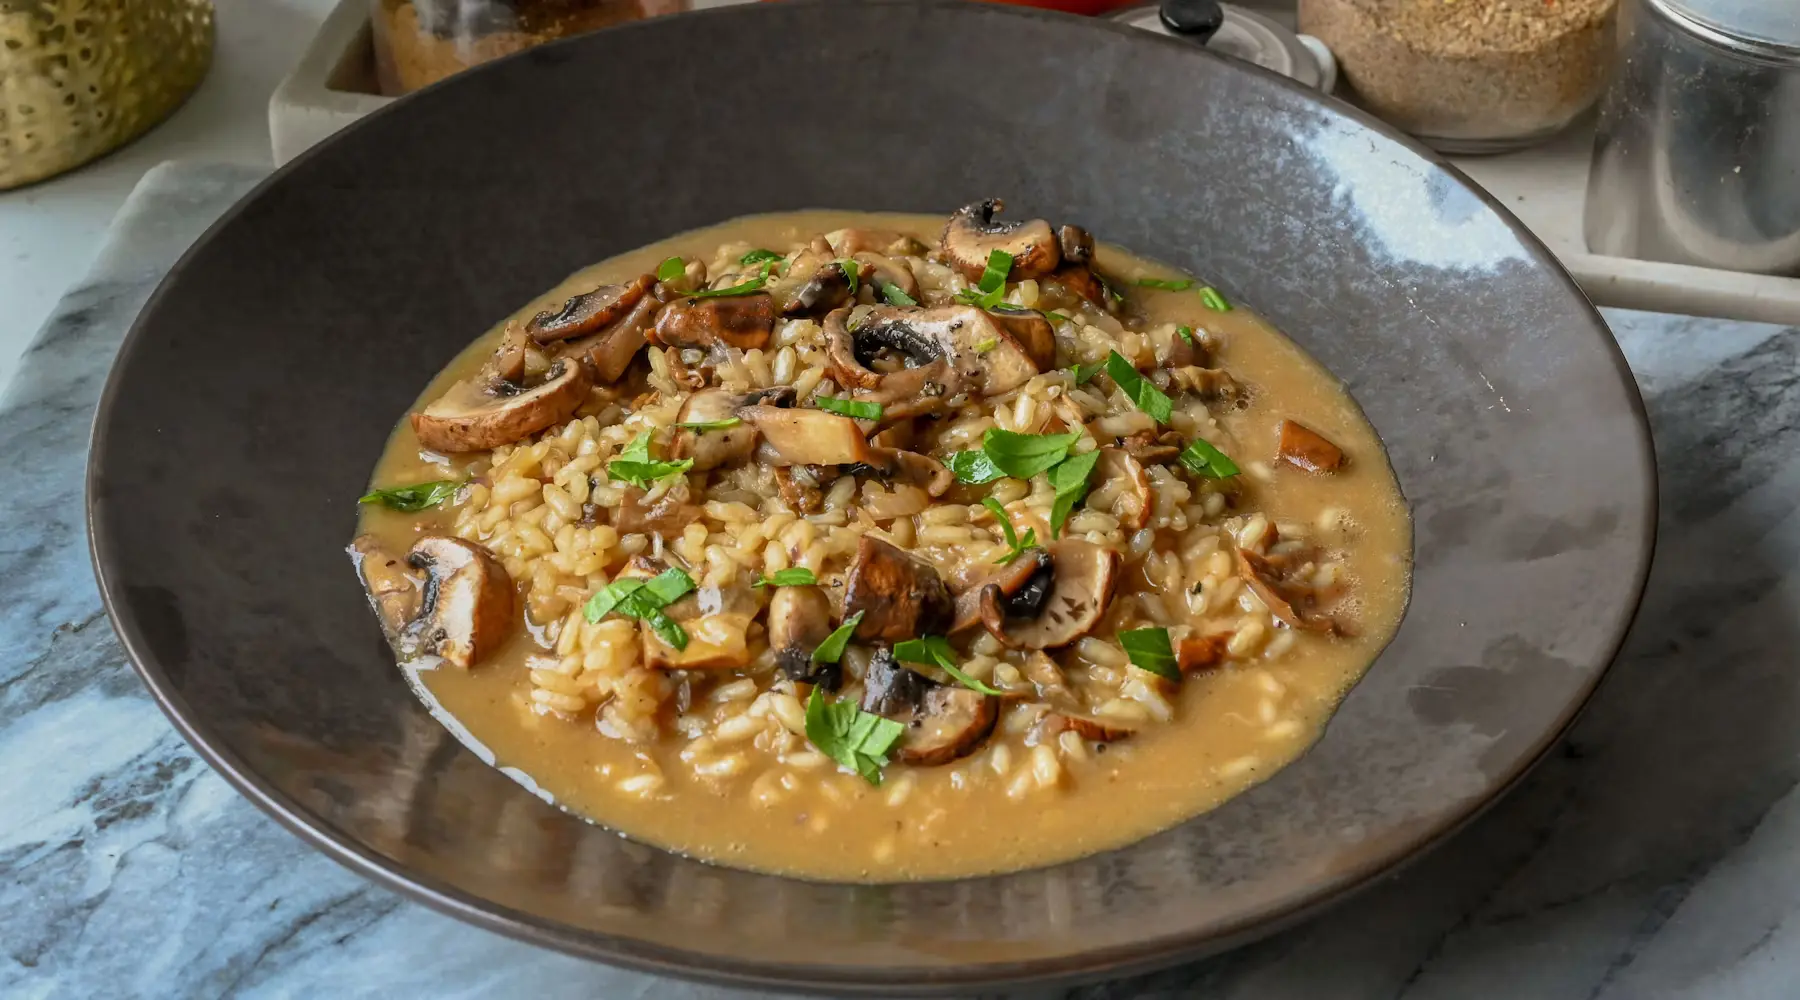 Risotto Recipes to Try at Home